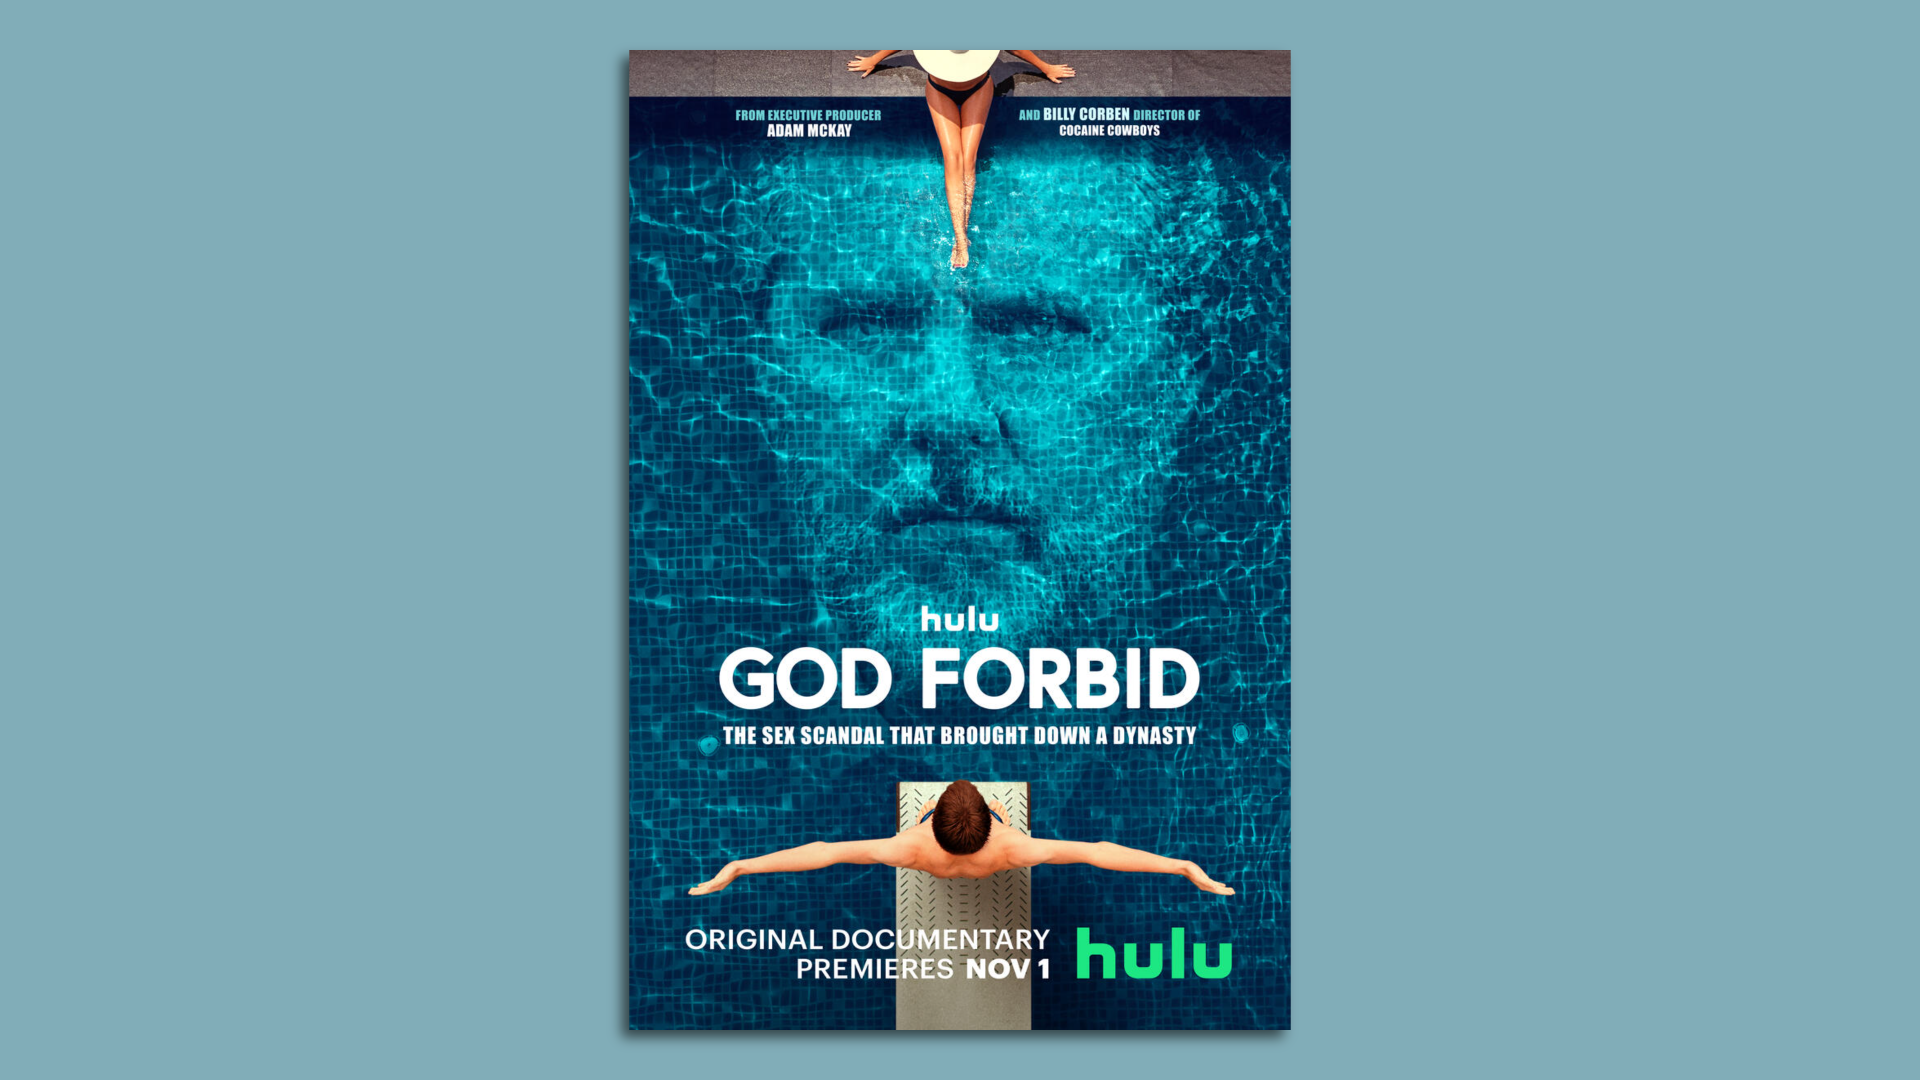 The cover art of the "God Forbid" documentary, with two people standing by a pool and the outline of Jerry Falwell Jr.'s face in the water.